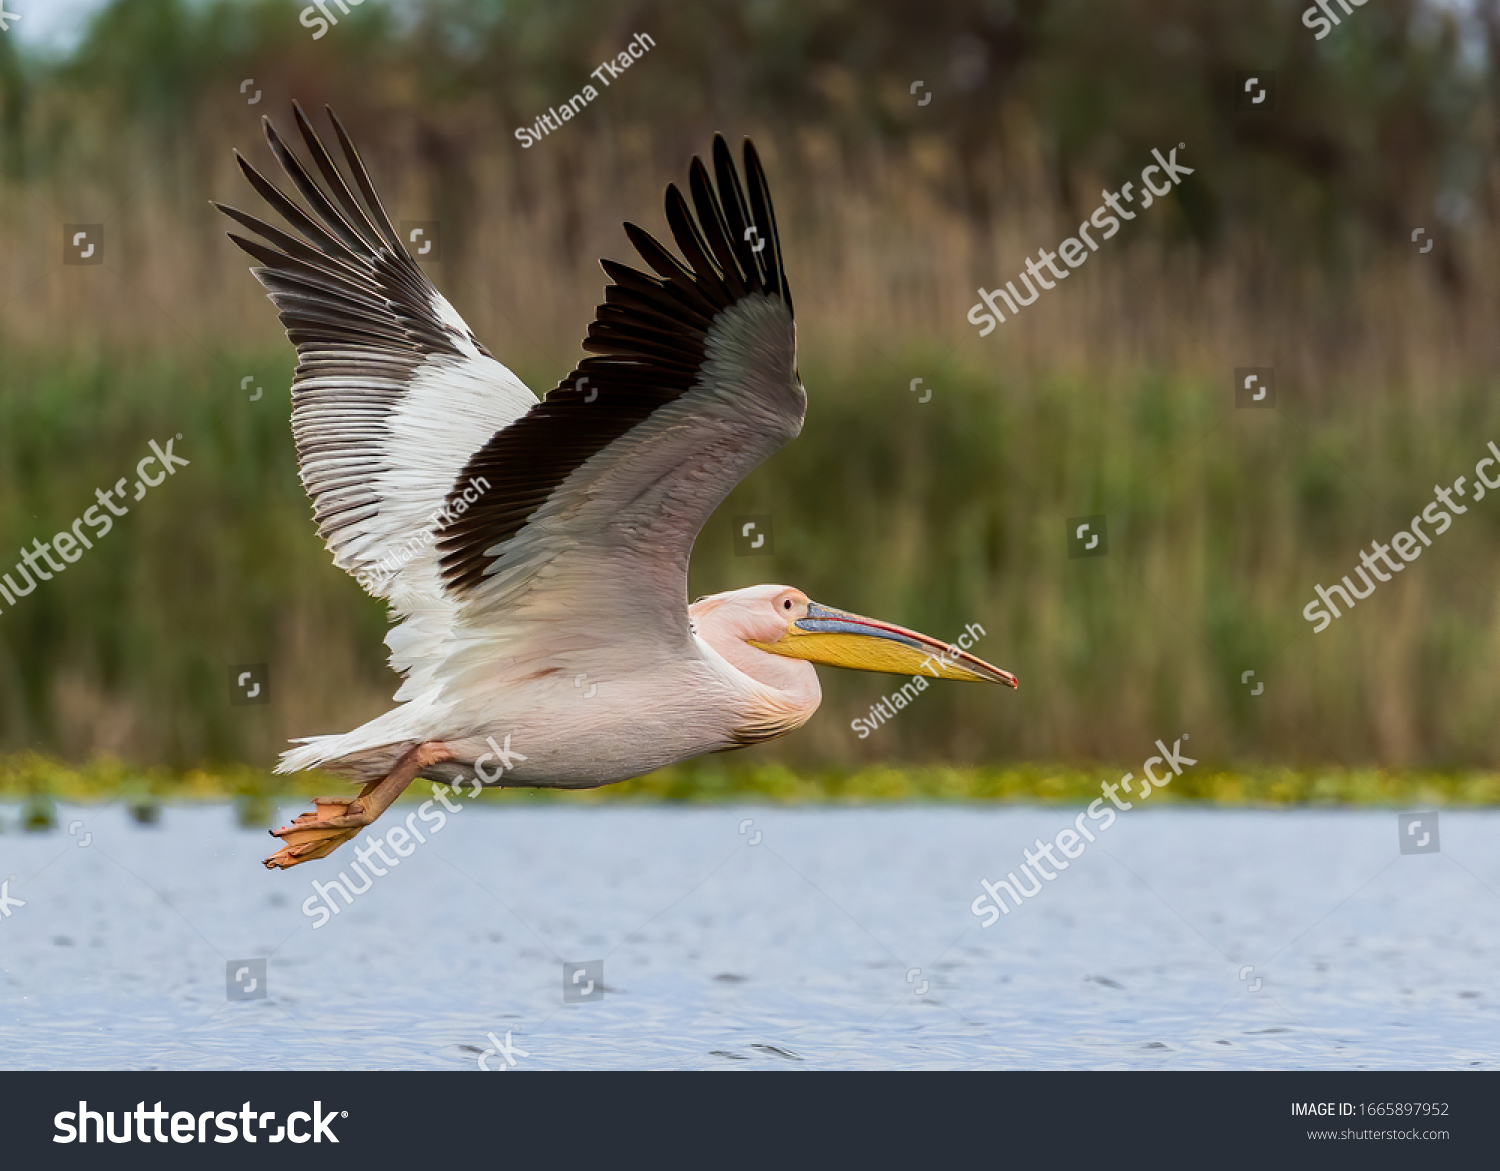 Great white pelican, or Eastern white pelican, or Rosy pelican, or White pelican (Pelecanus onocrotalus) in breeding plumage flying in its natural aquatic habitat; the Danube Delta in Romania. #1665897952